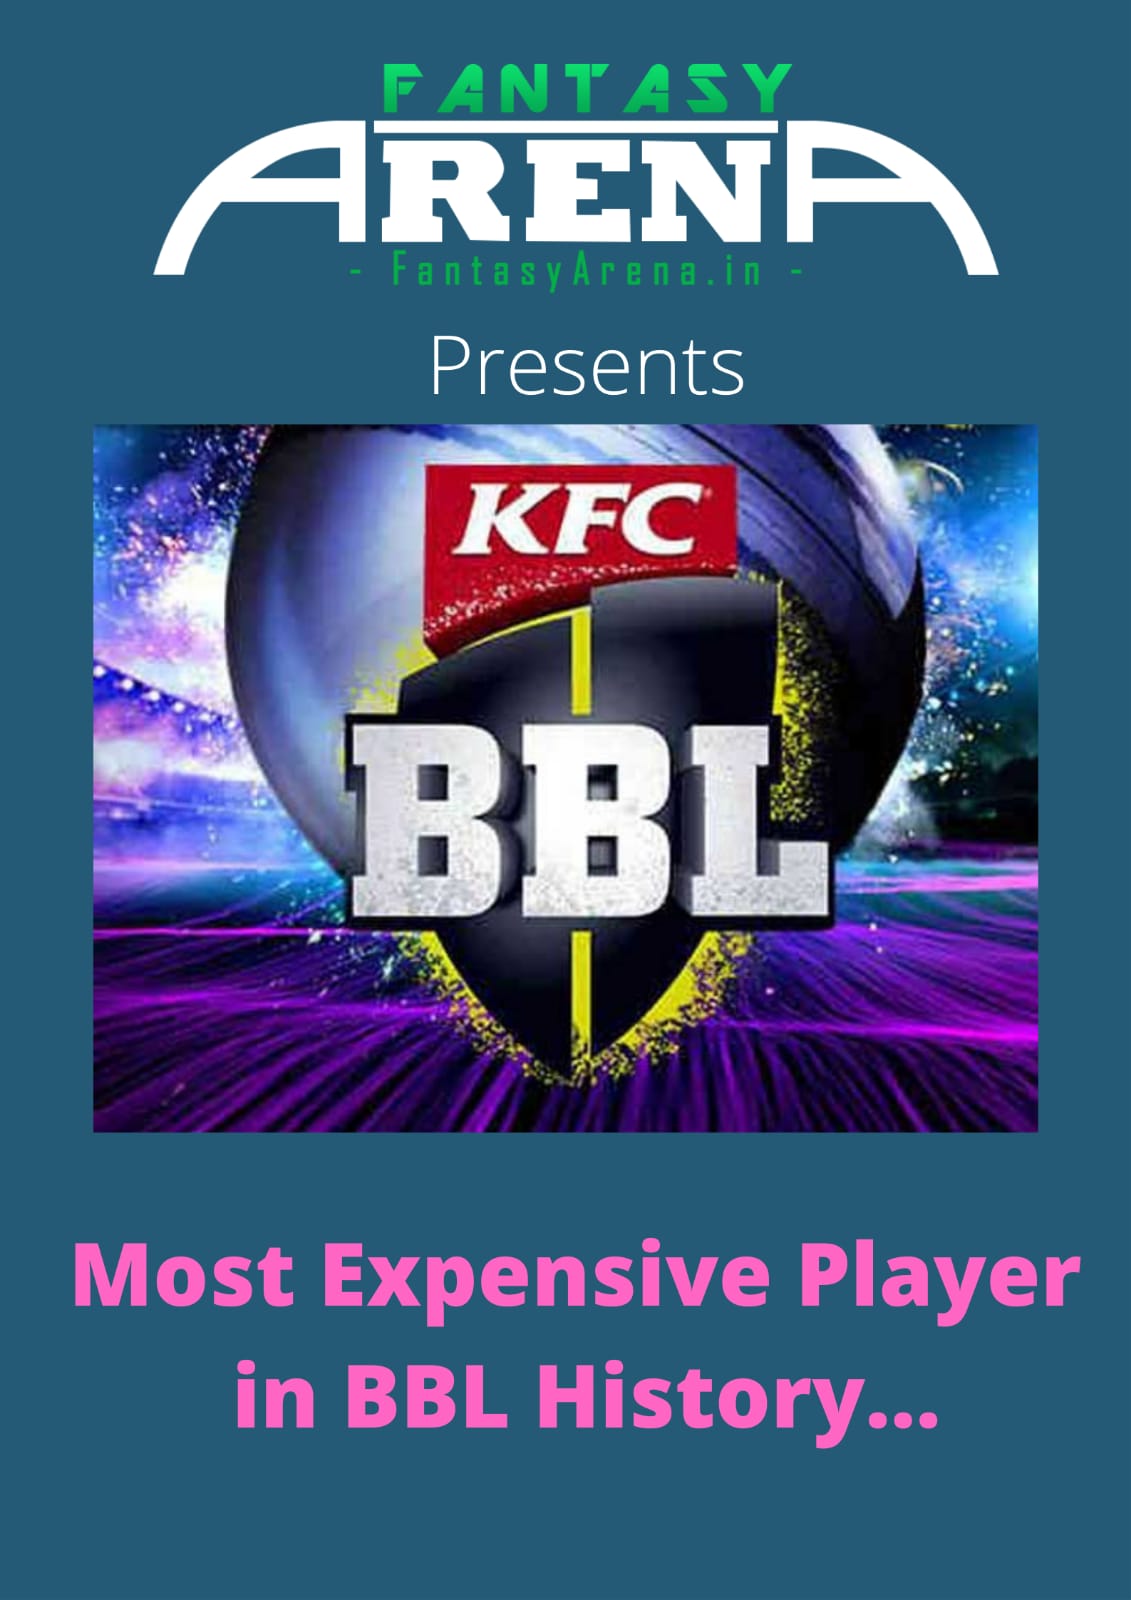 Most Expensive Player in BBL History.